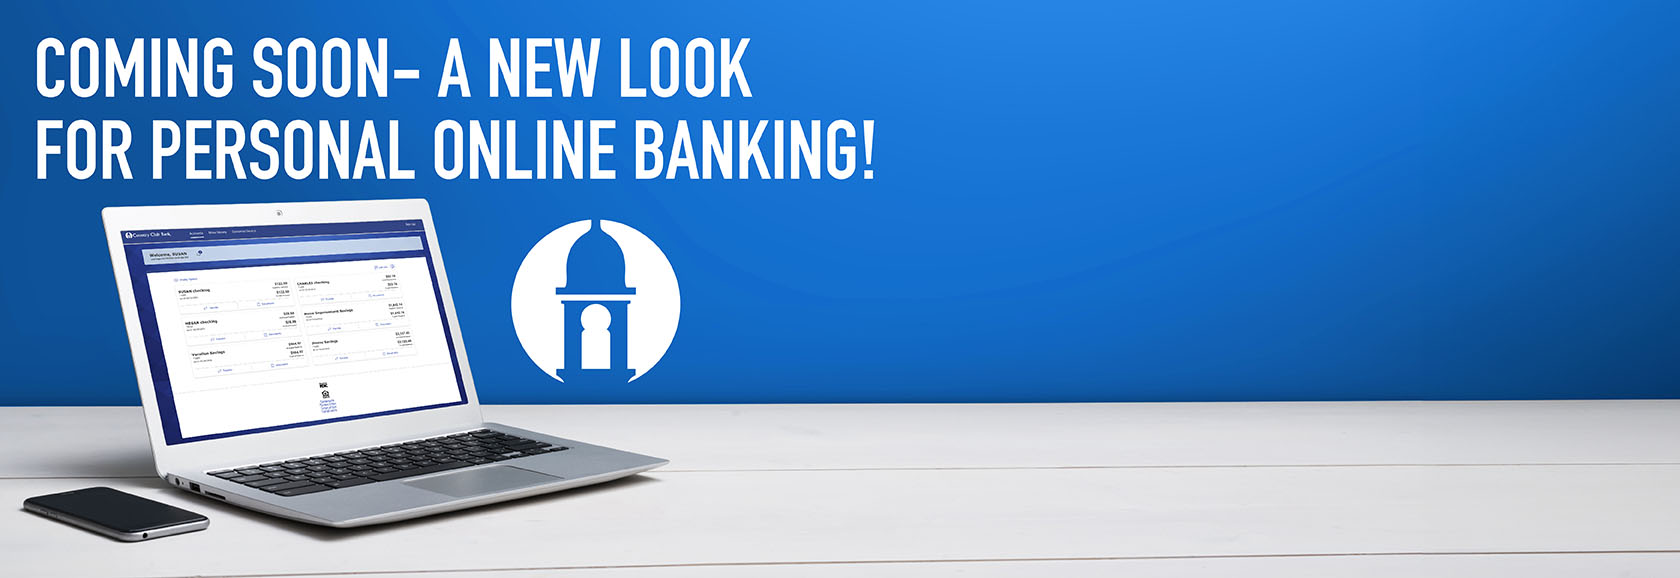 A new look for personal online banking banner image